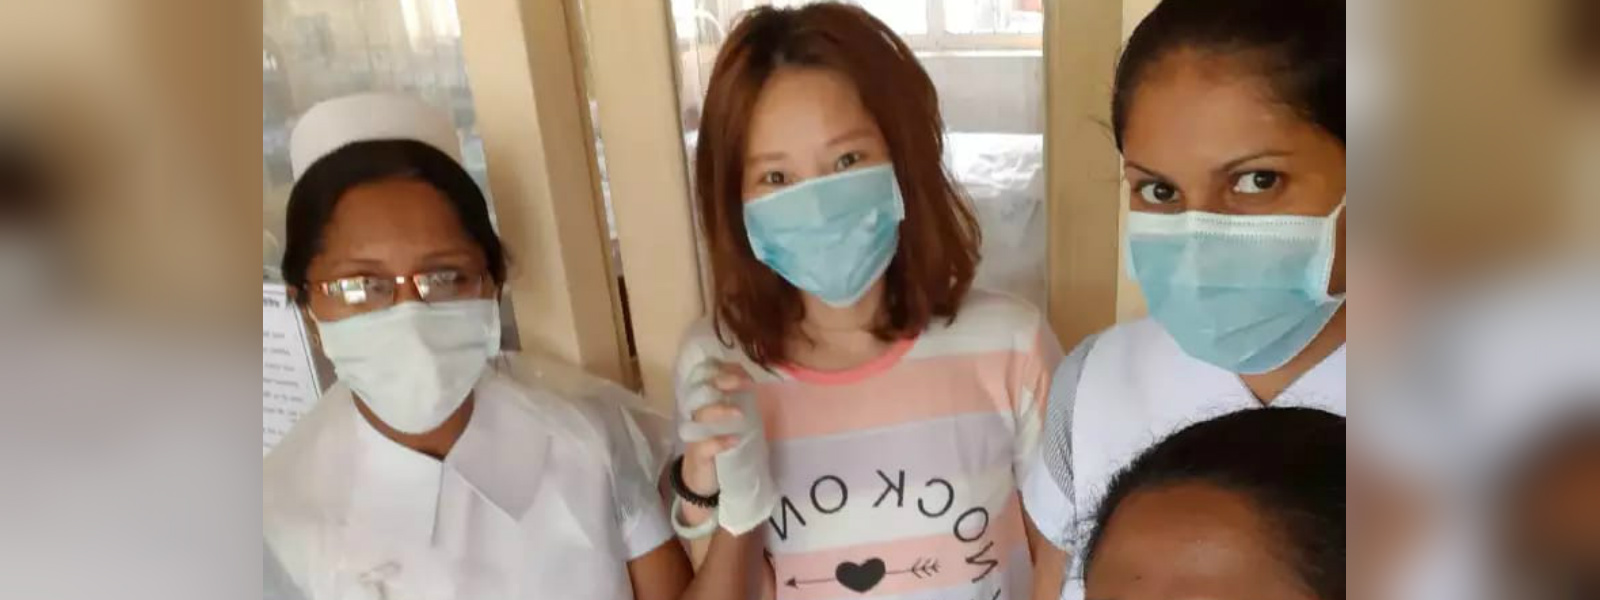 Coronavirus patient to depart for China after making a full recovery